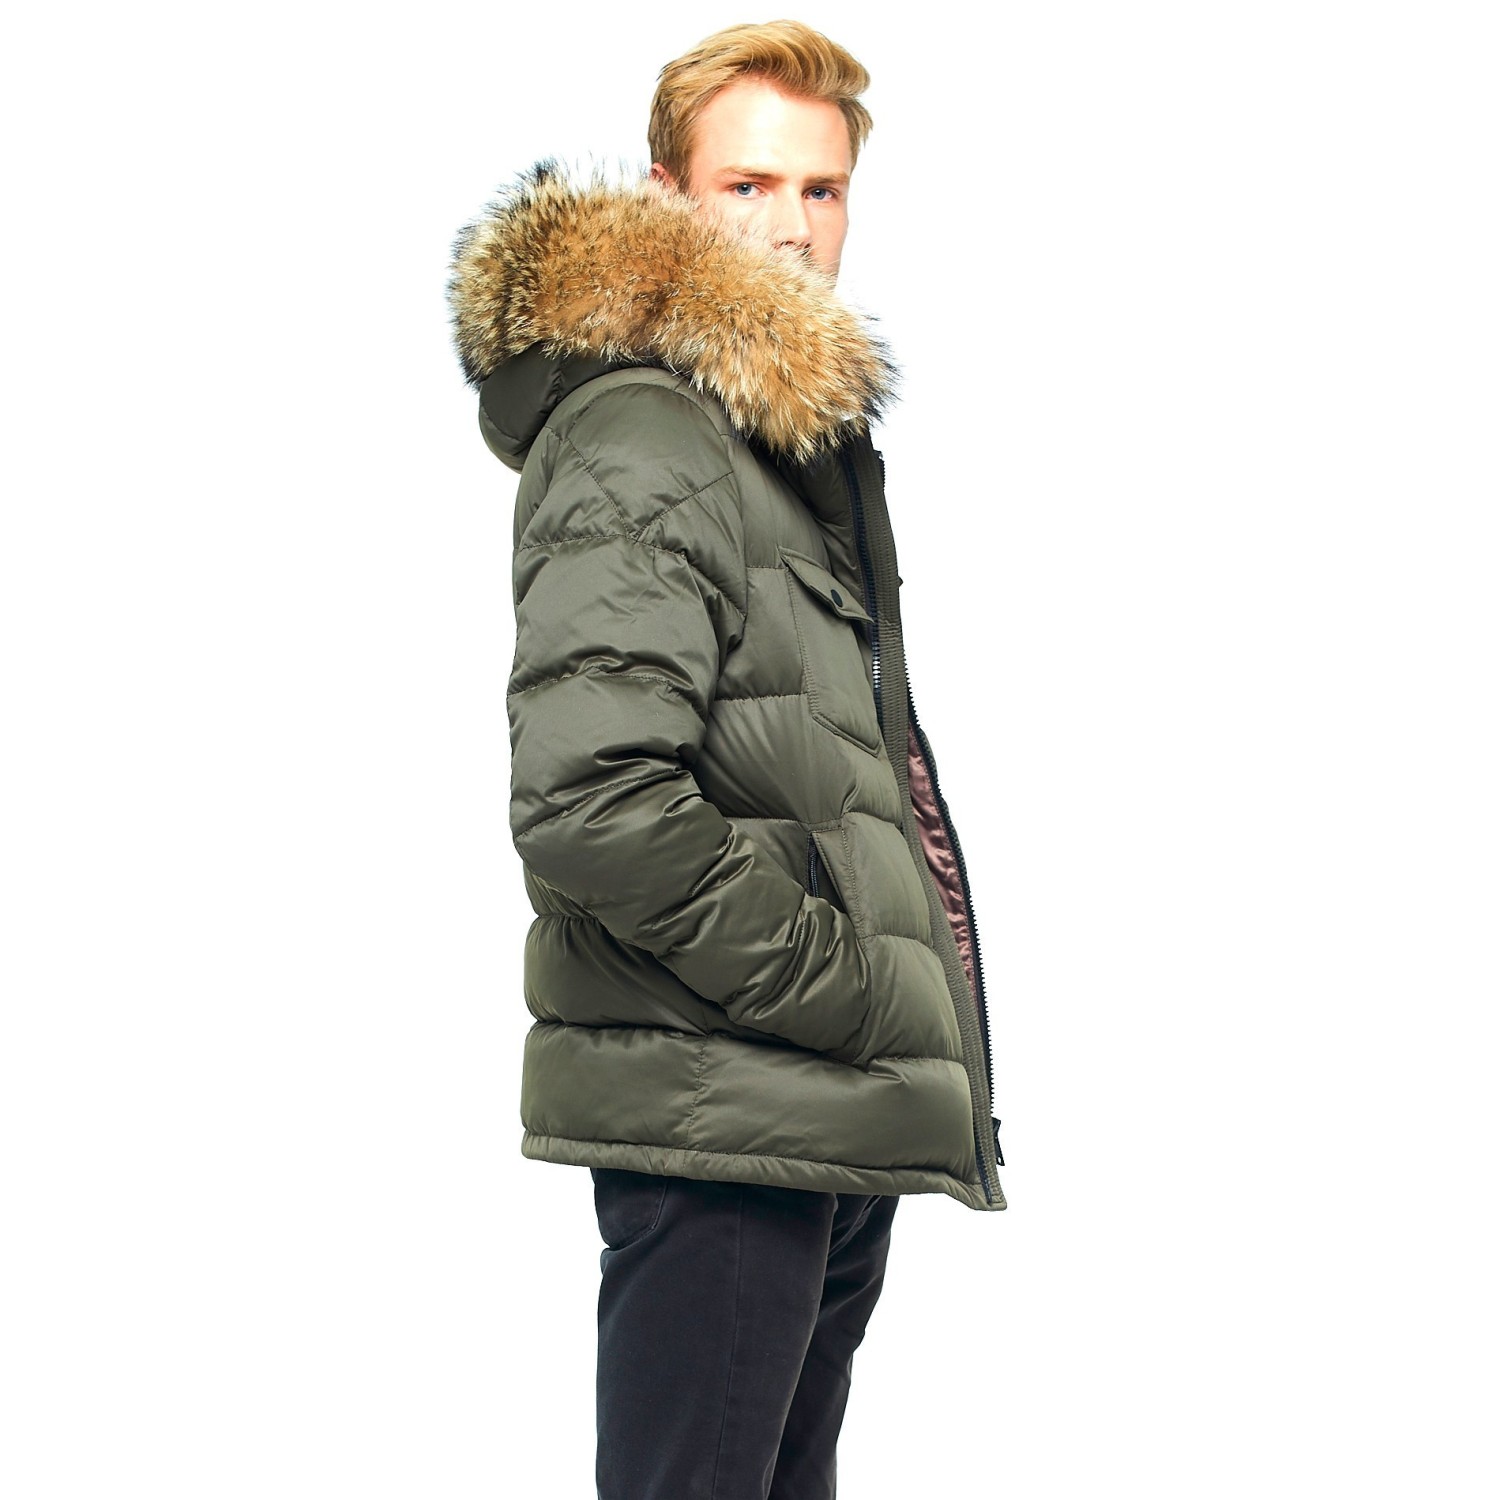 Lutratocro Mens Winter Faux Fur Hooded Thicken Fleece Quilted Parka Coat Outwear